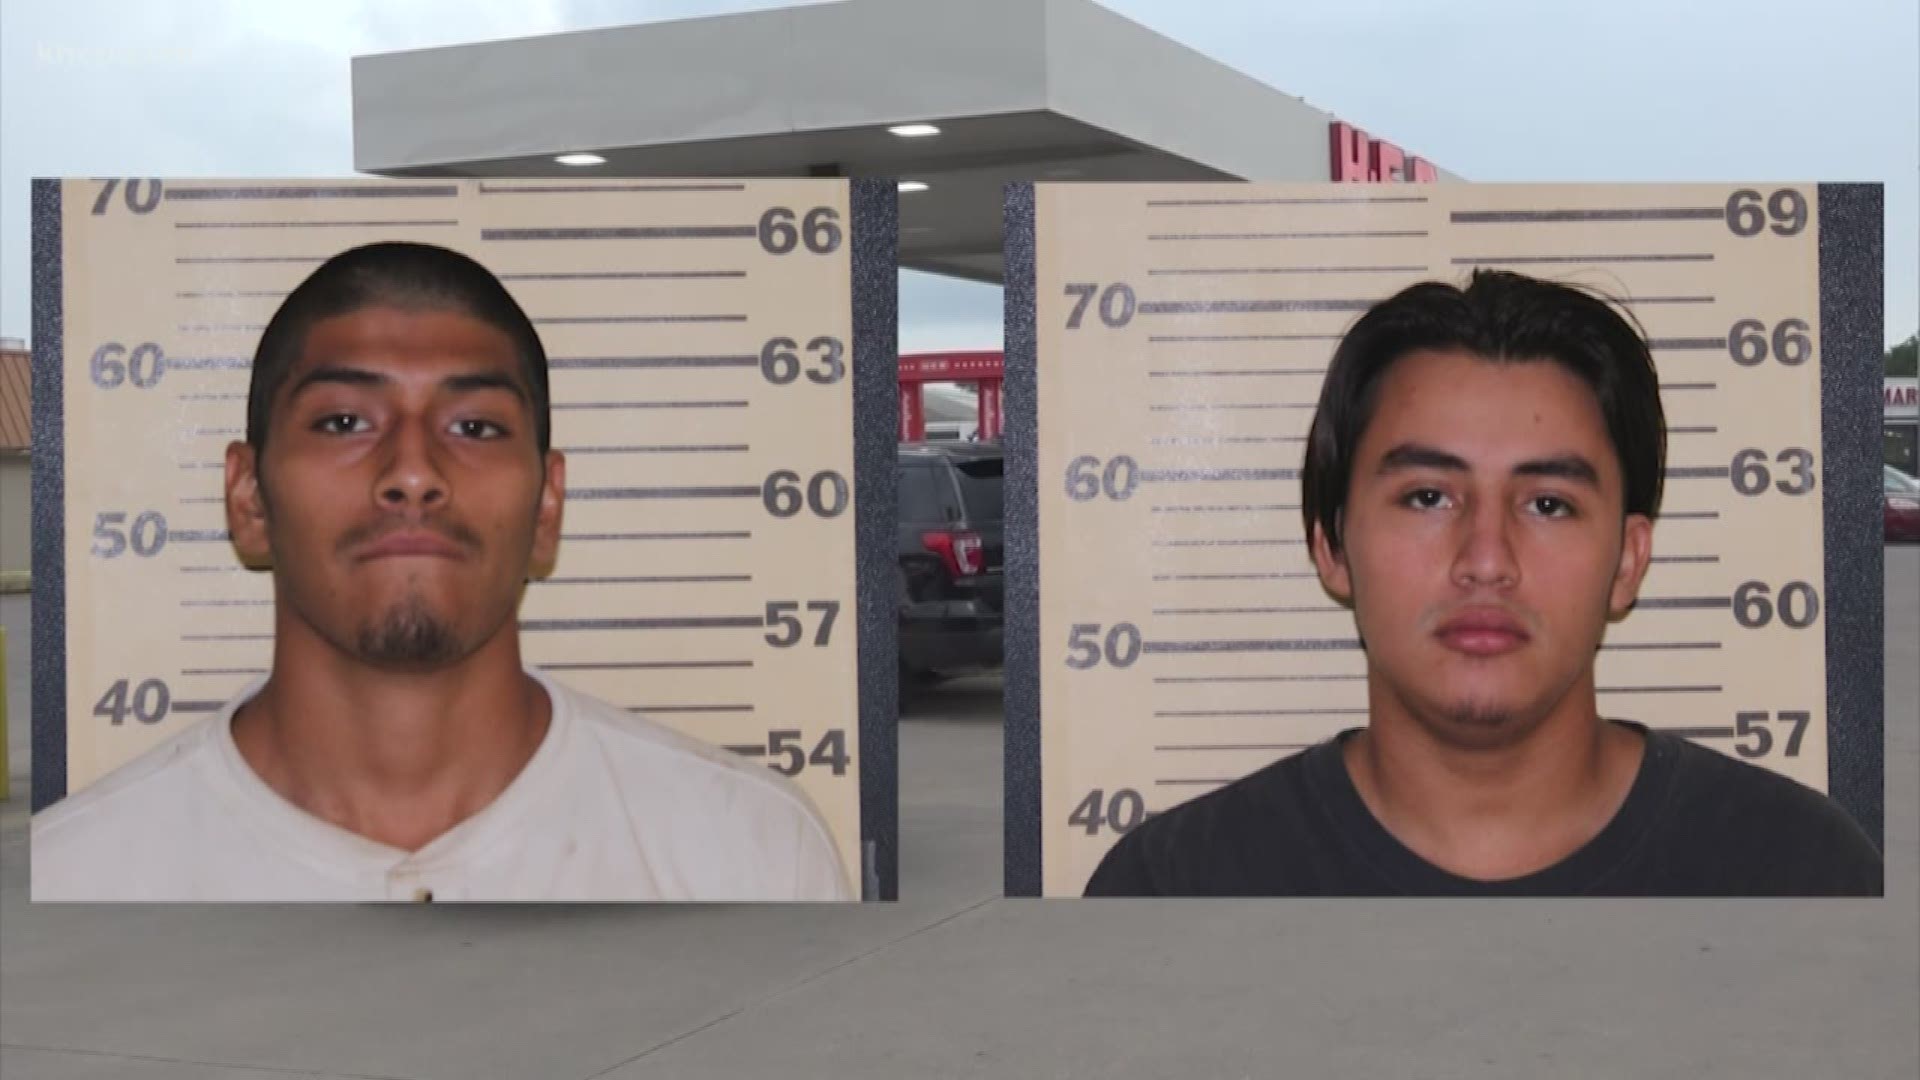 Three teenagers were arrested and charged with capital murder after a 16-year-old was fatally shot in the parking lot of a H-E-B. Police said the motive may have been a robbery.